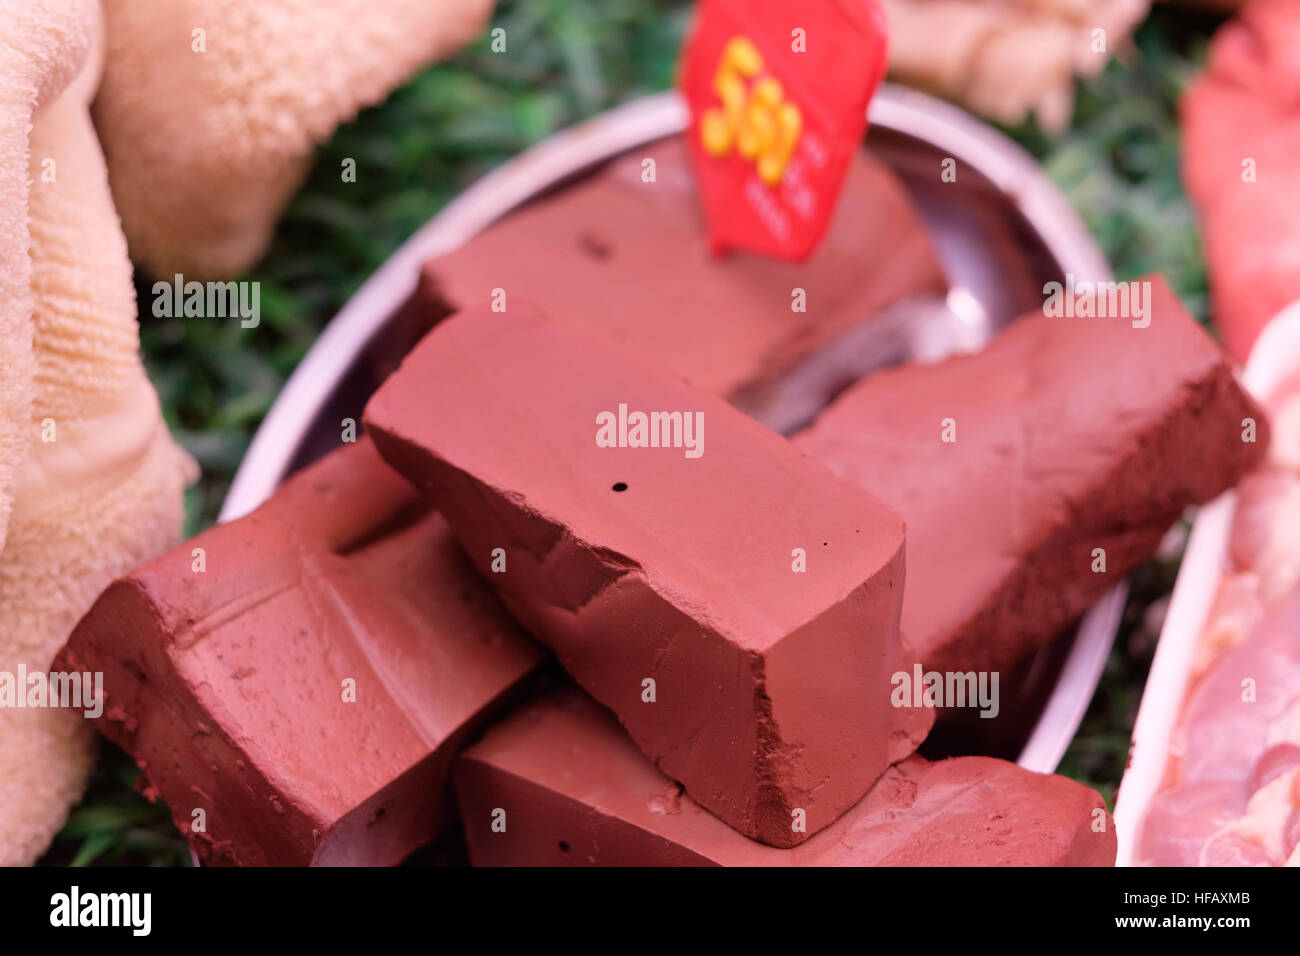 pork beef chicken liver pate red creamy lovely Stock Photo